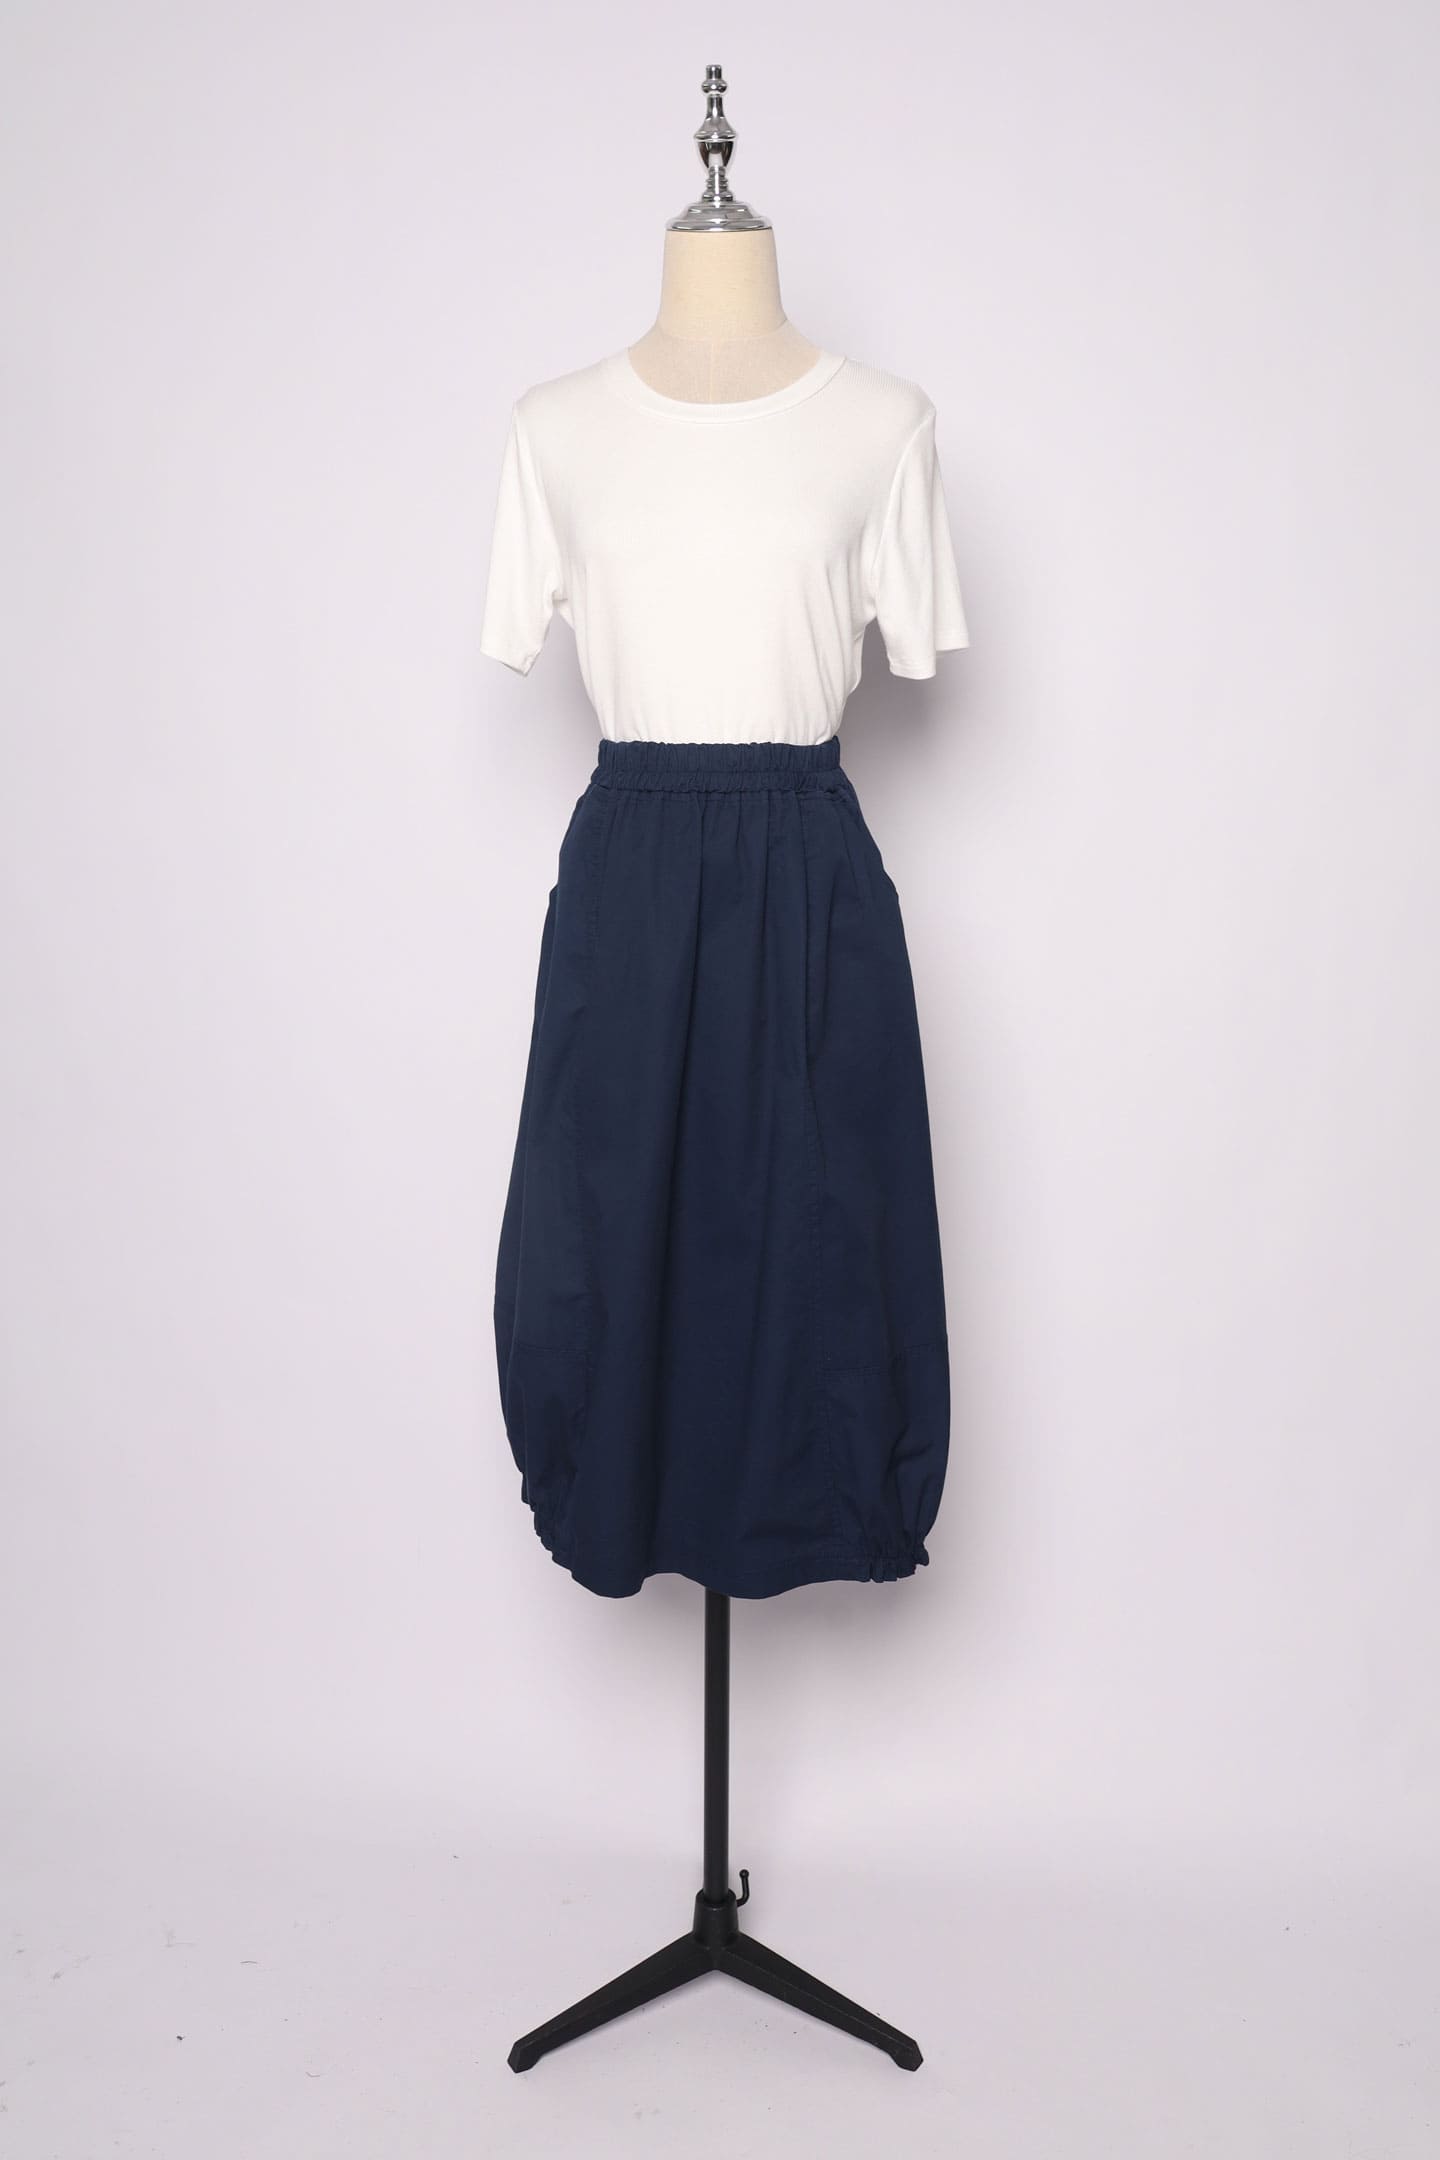 PO - Quinto Skirt in Blue